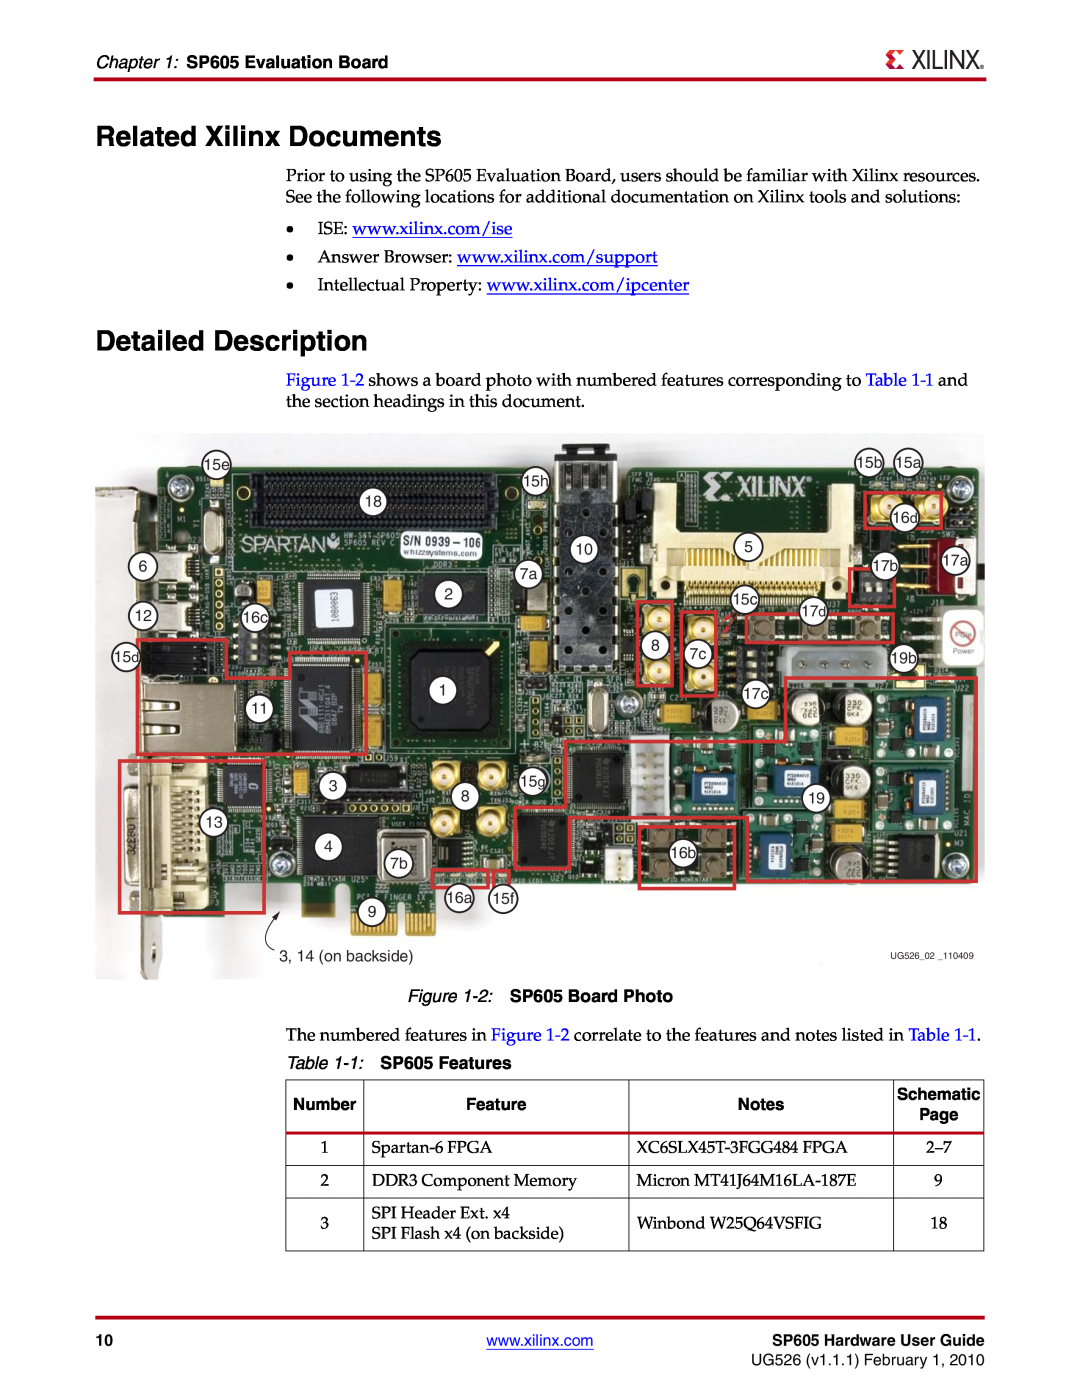 Xilinx Related Xilinx Documents, Detailed Description, 2 SP605 Board Photo, SP605 Features, SP605 Evaluation Board 